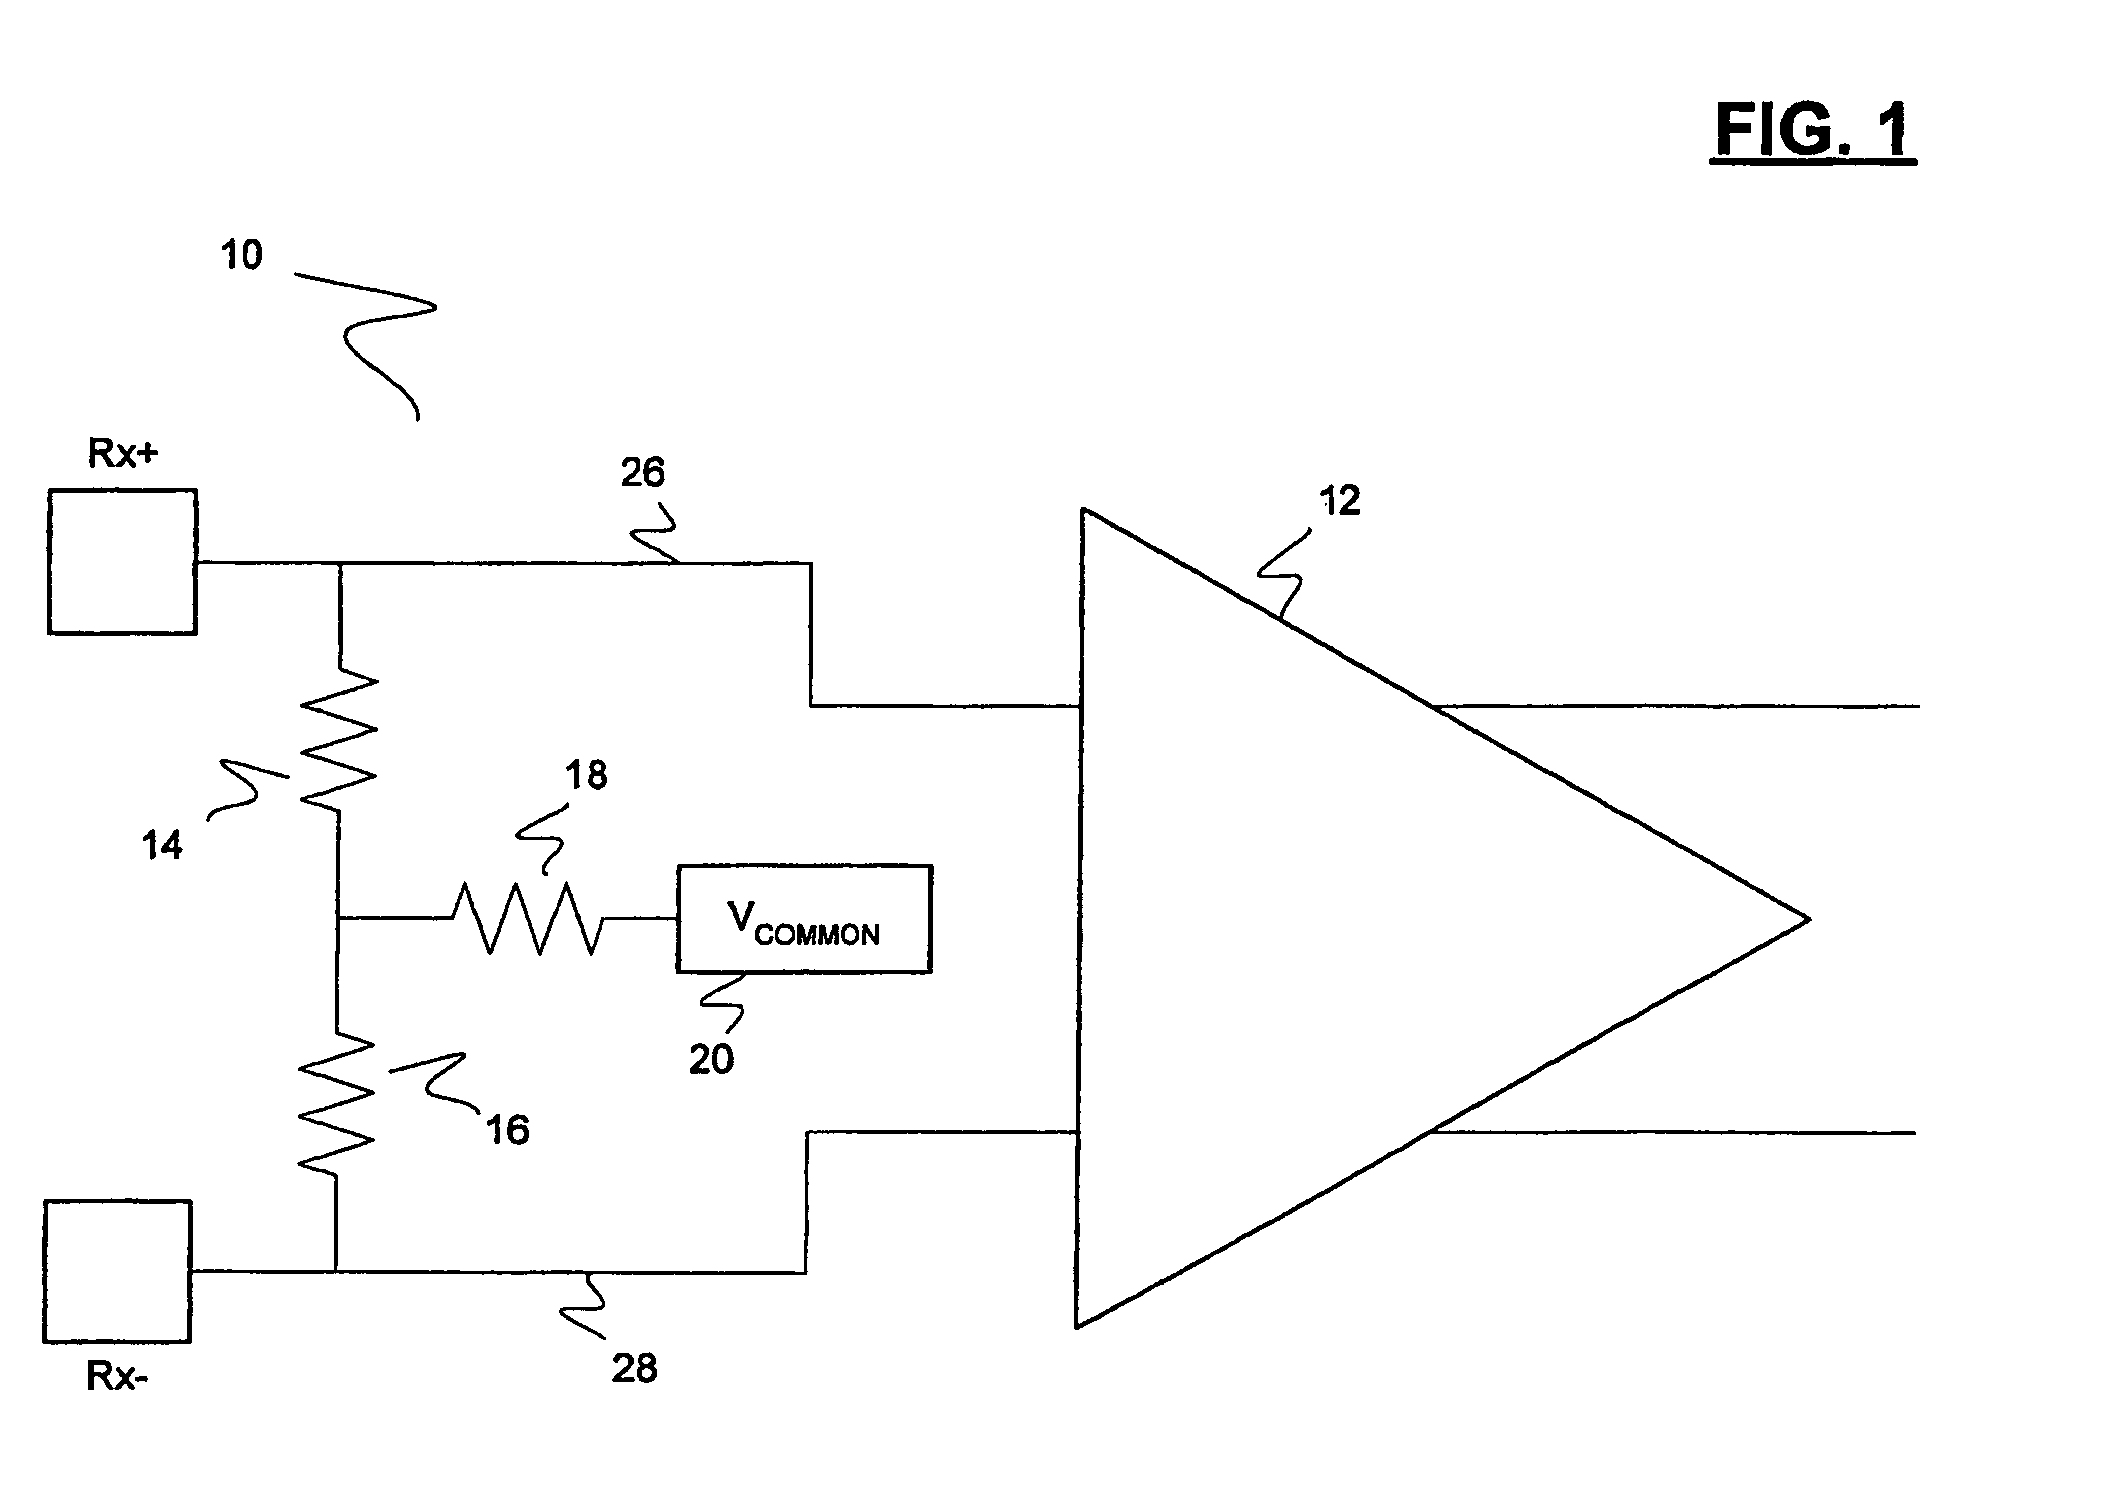 Circuits, architectures, systems and methods for overvoltage protection